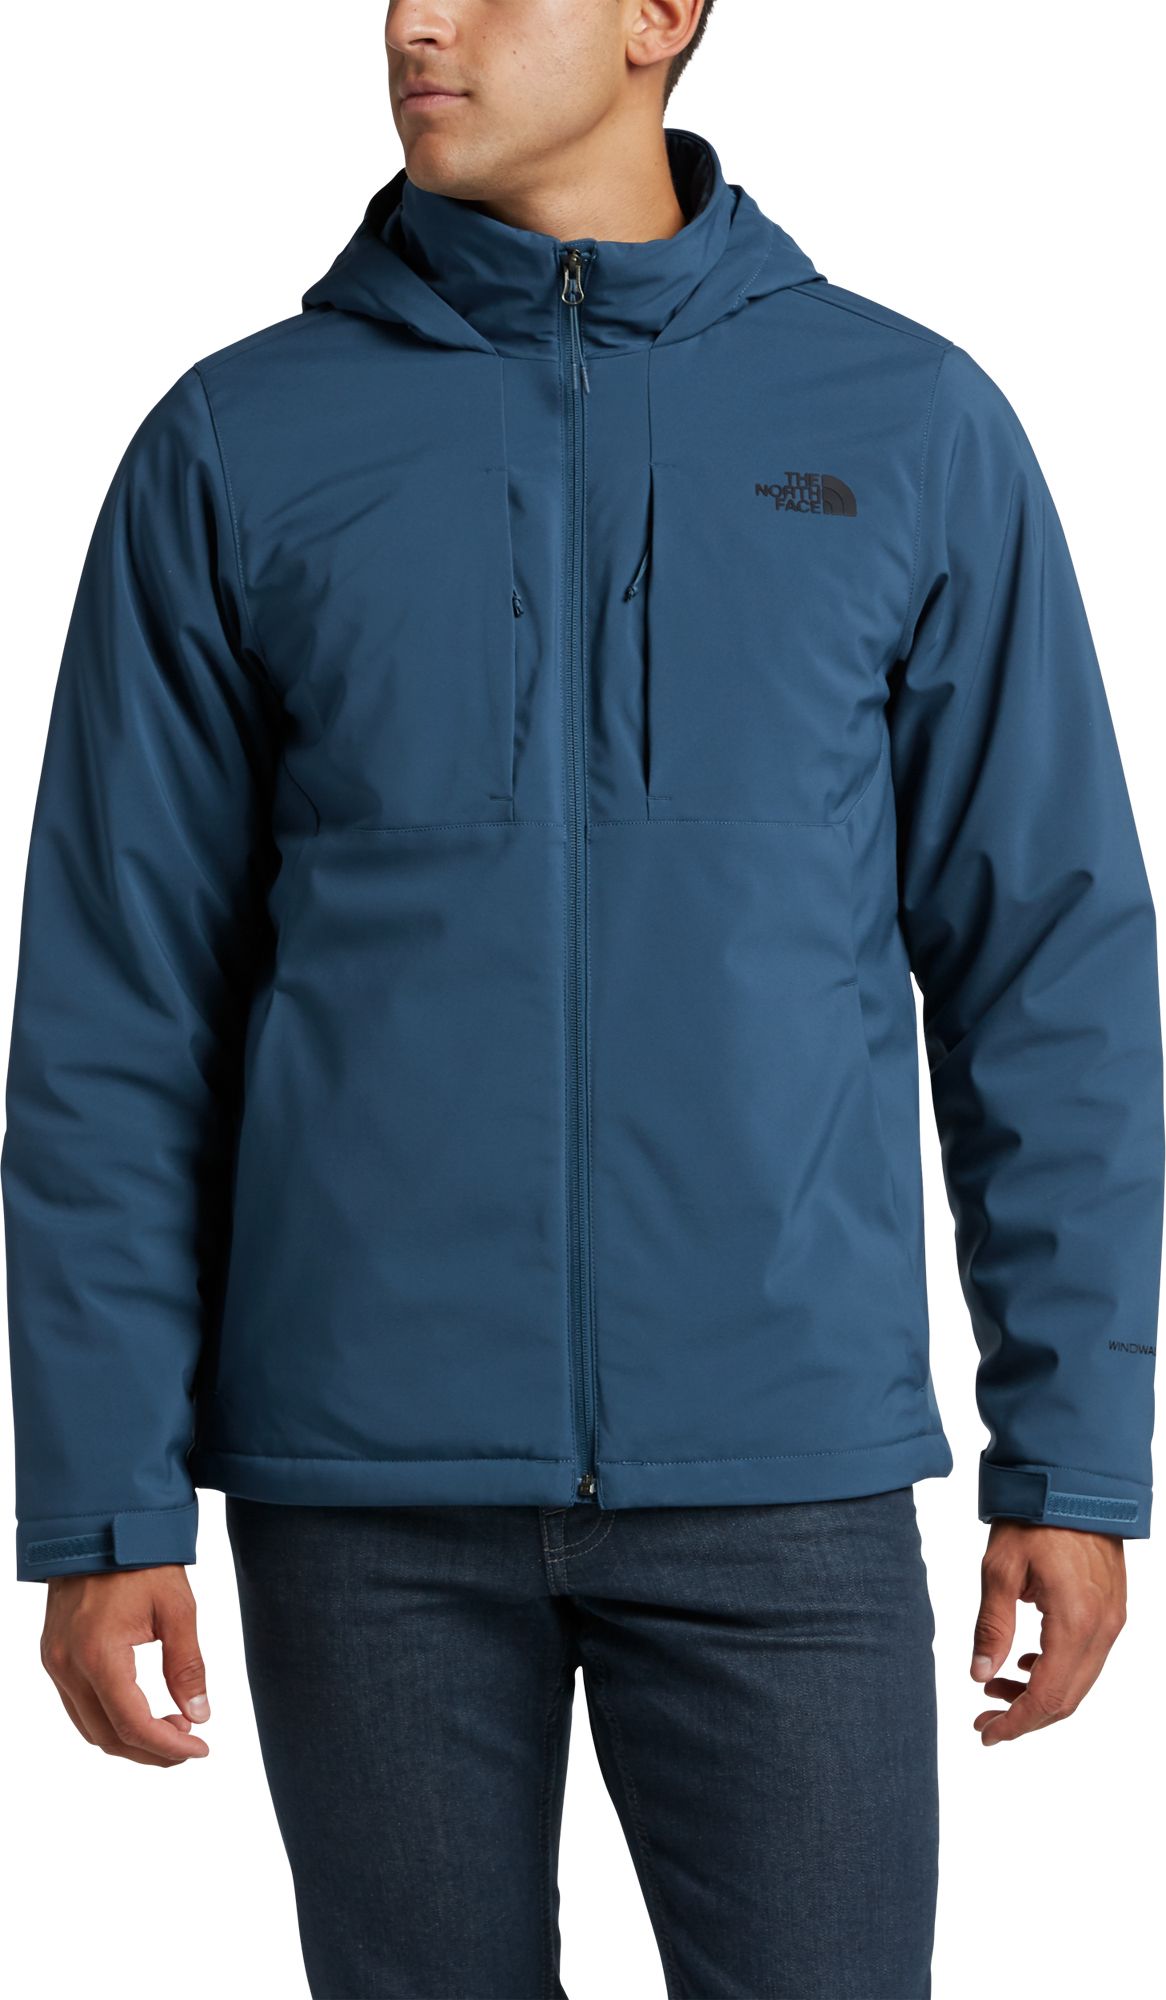 north face apex insulated jacket